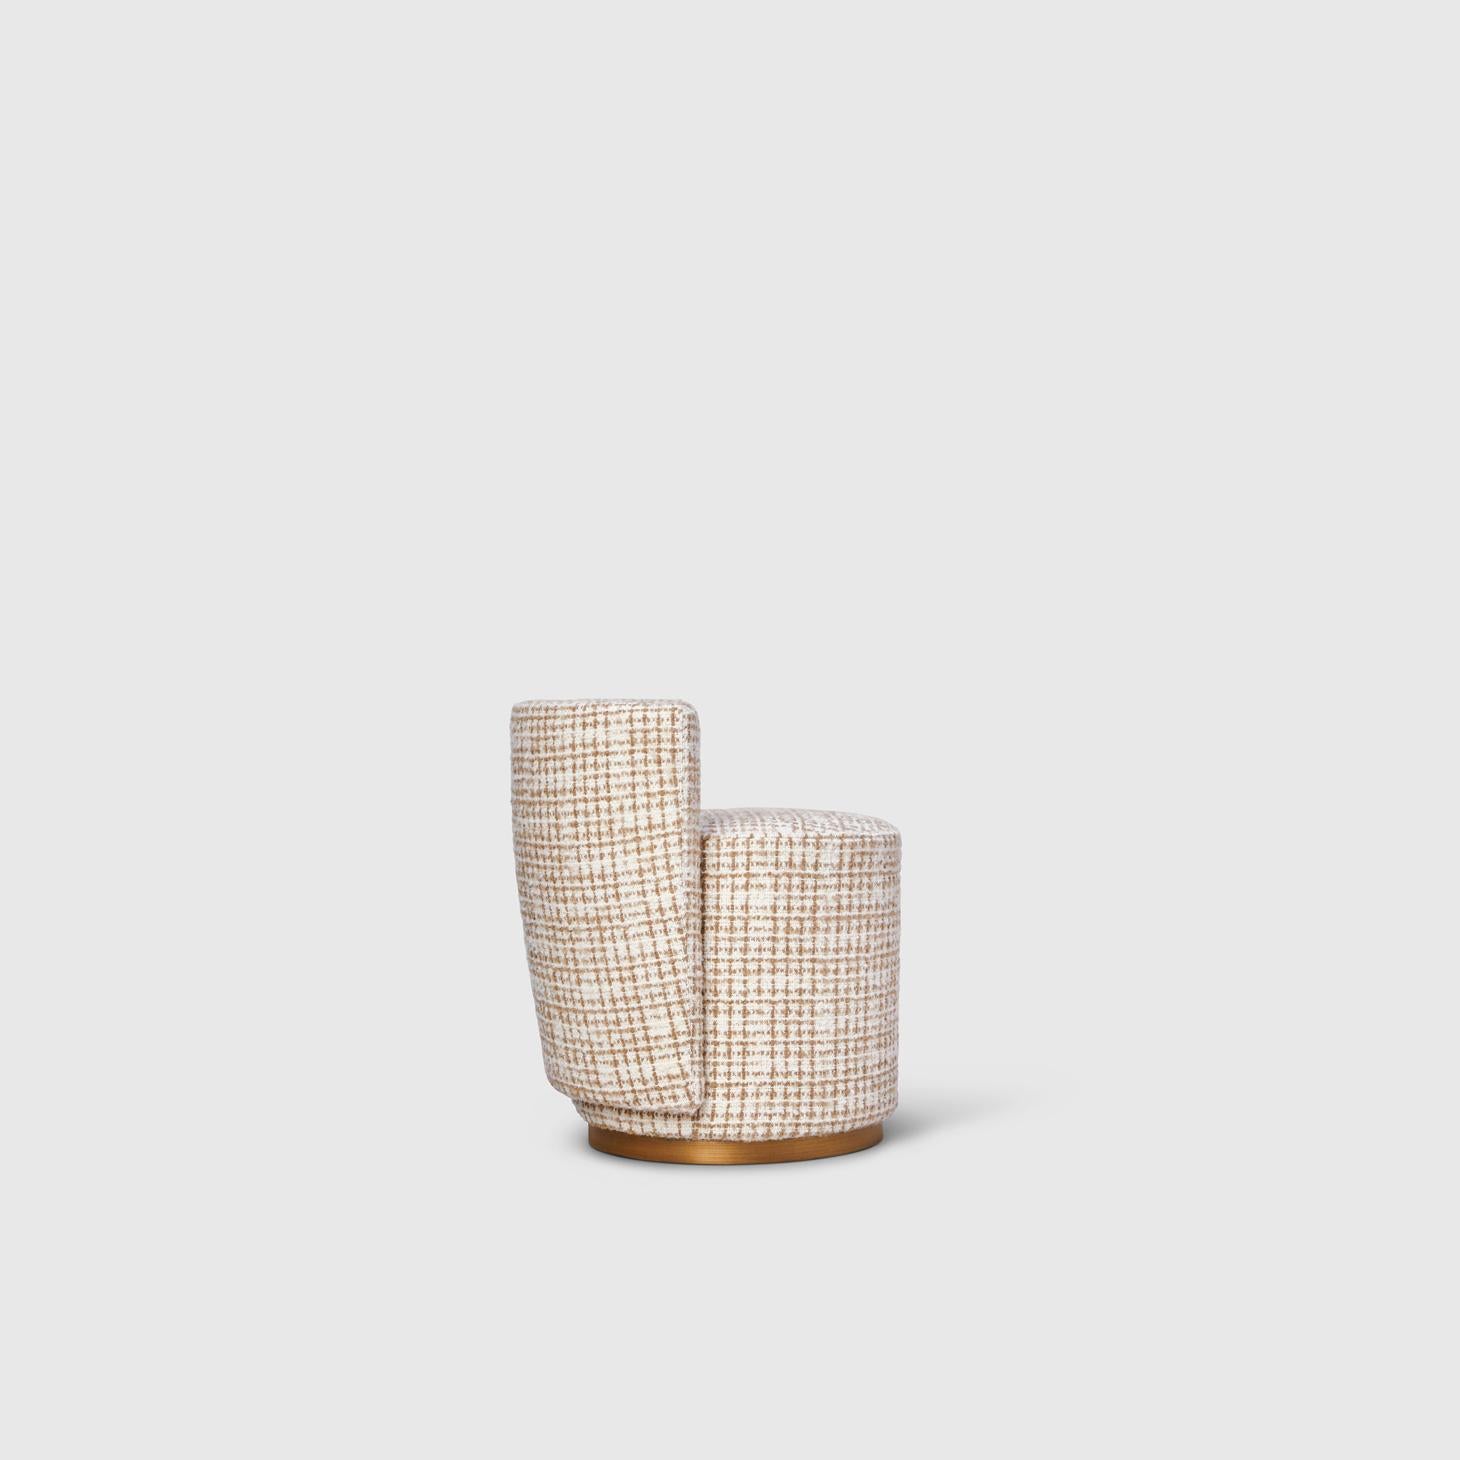 This in-stock Bond Street stool by Yabu Pushelberg is presented in Dedar More-is-More fabric on it's swiveling antique brass finish base. The stool has an architectural form and can also be ordered in your choice of fabric or leather.

A version